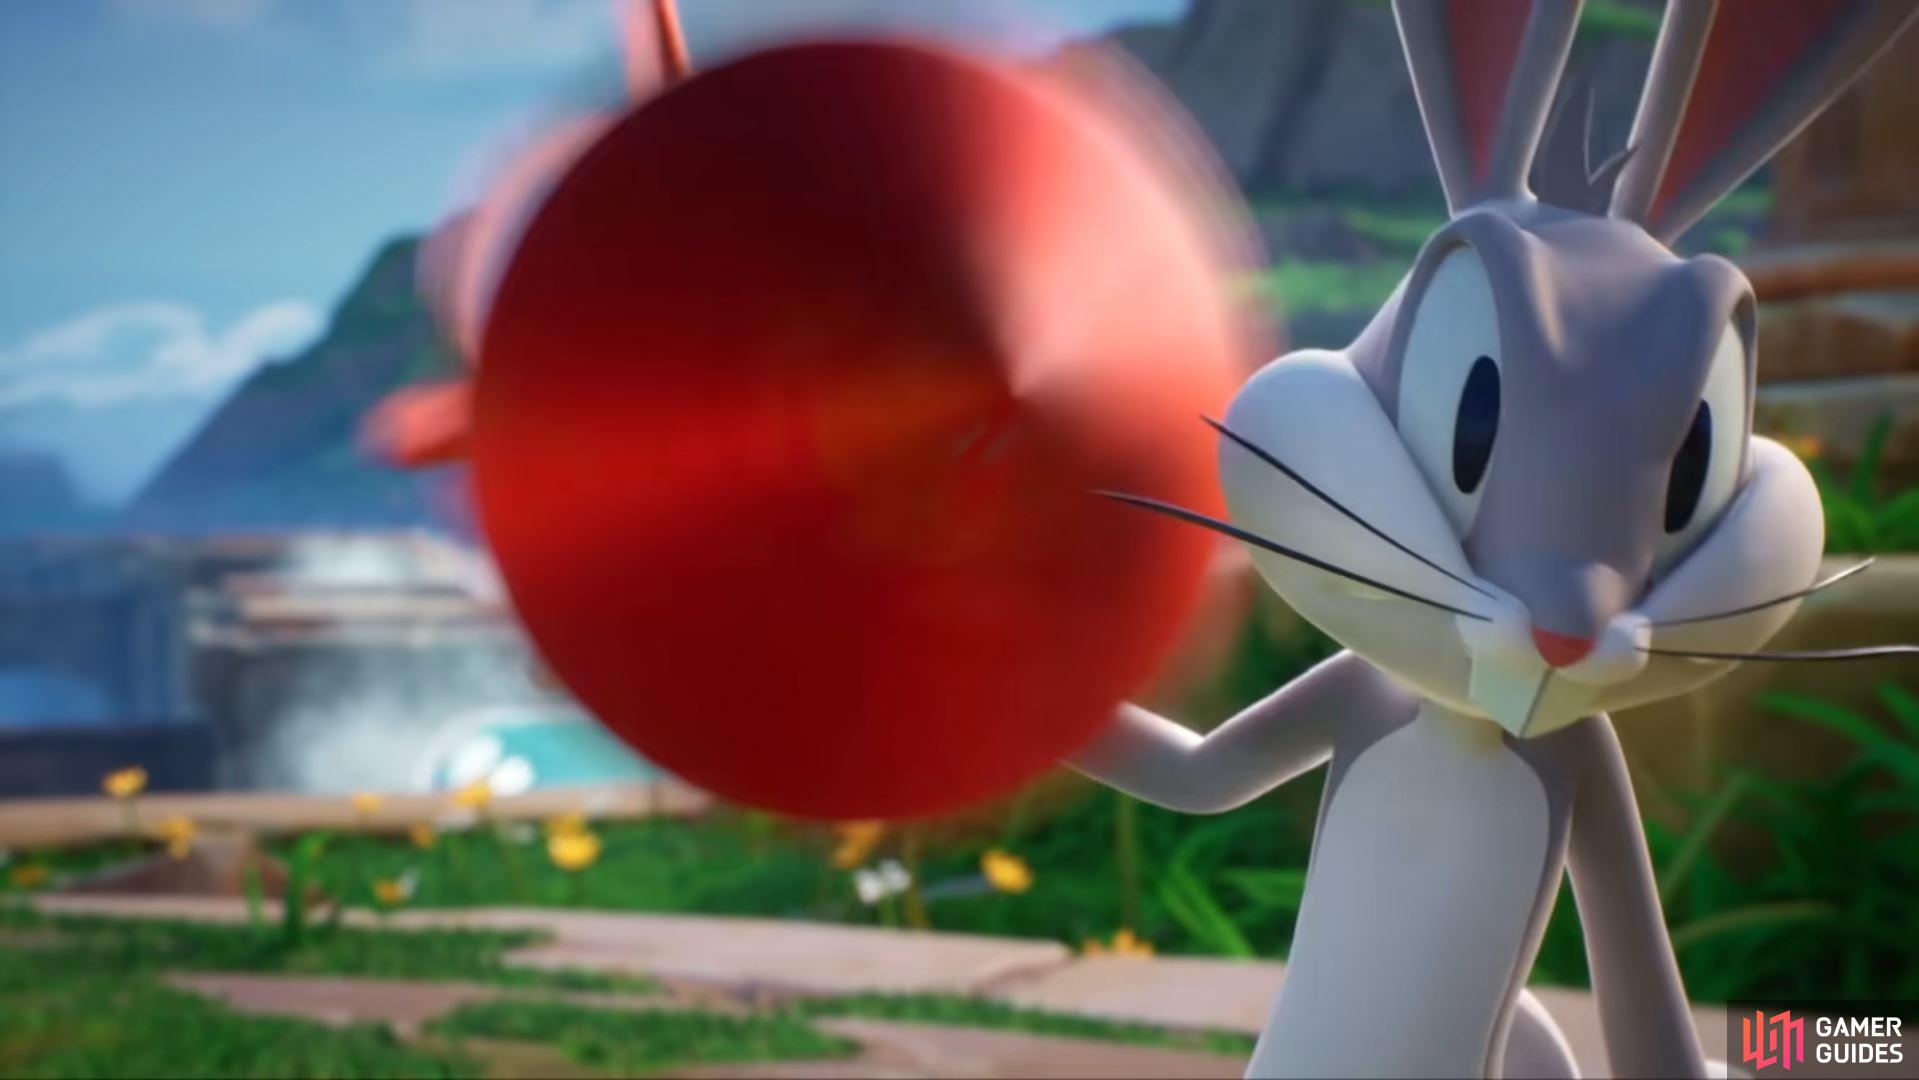 Bugs wants everything cooldown-related thanks to his rockets taking some time to come back. Image via Warner Brothers.